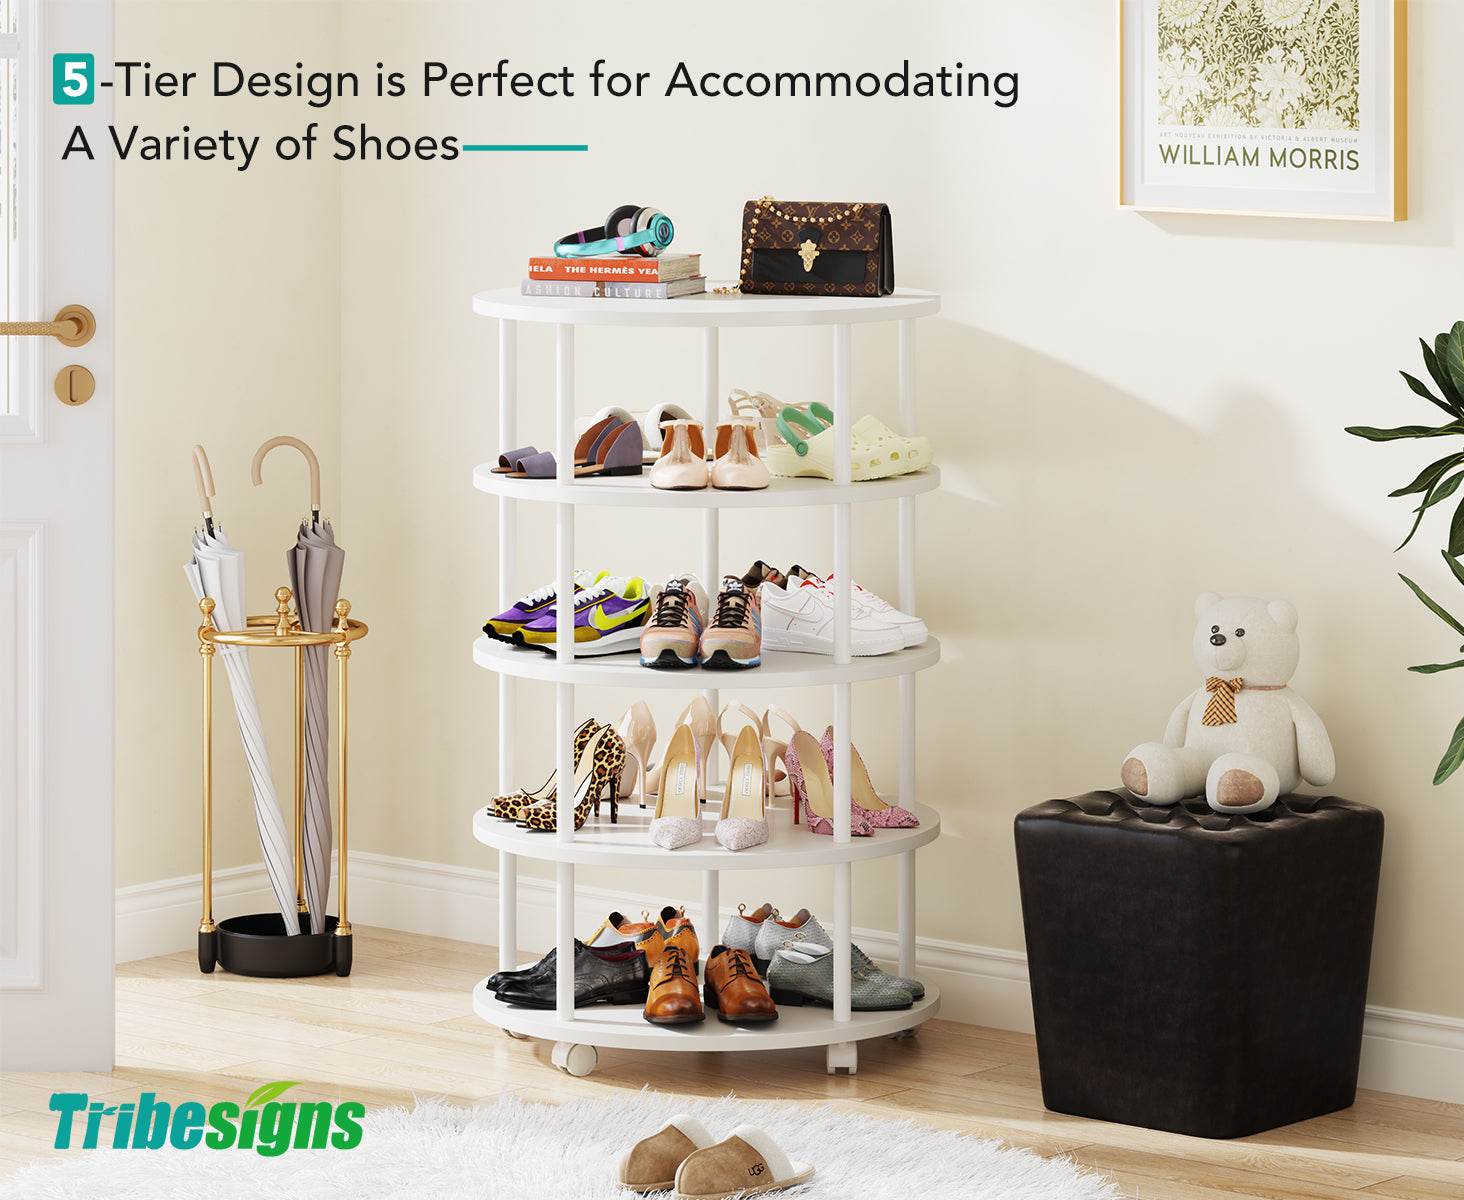 Spinning Shoe Rack Stand Alone 